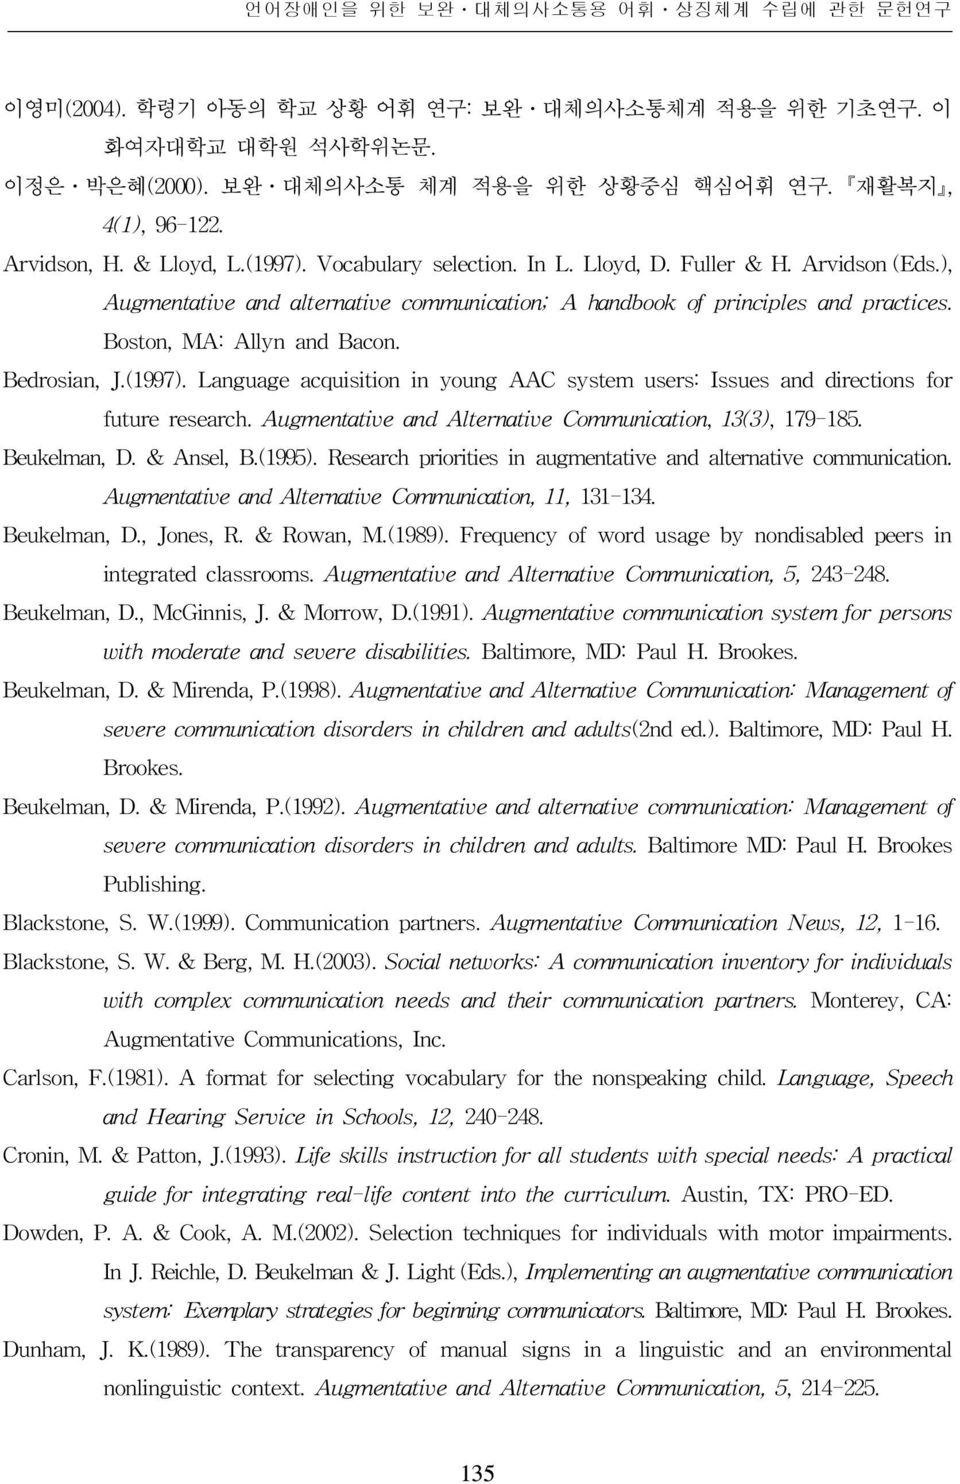 Bedrosian, J.(1997). Language acquisition in young AAC system users: Issues and directions for future research. Augmentative and Alternative Communication, 13(3), 179-185. Beukelman, D. & Ansel, B.